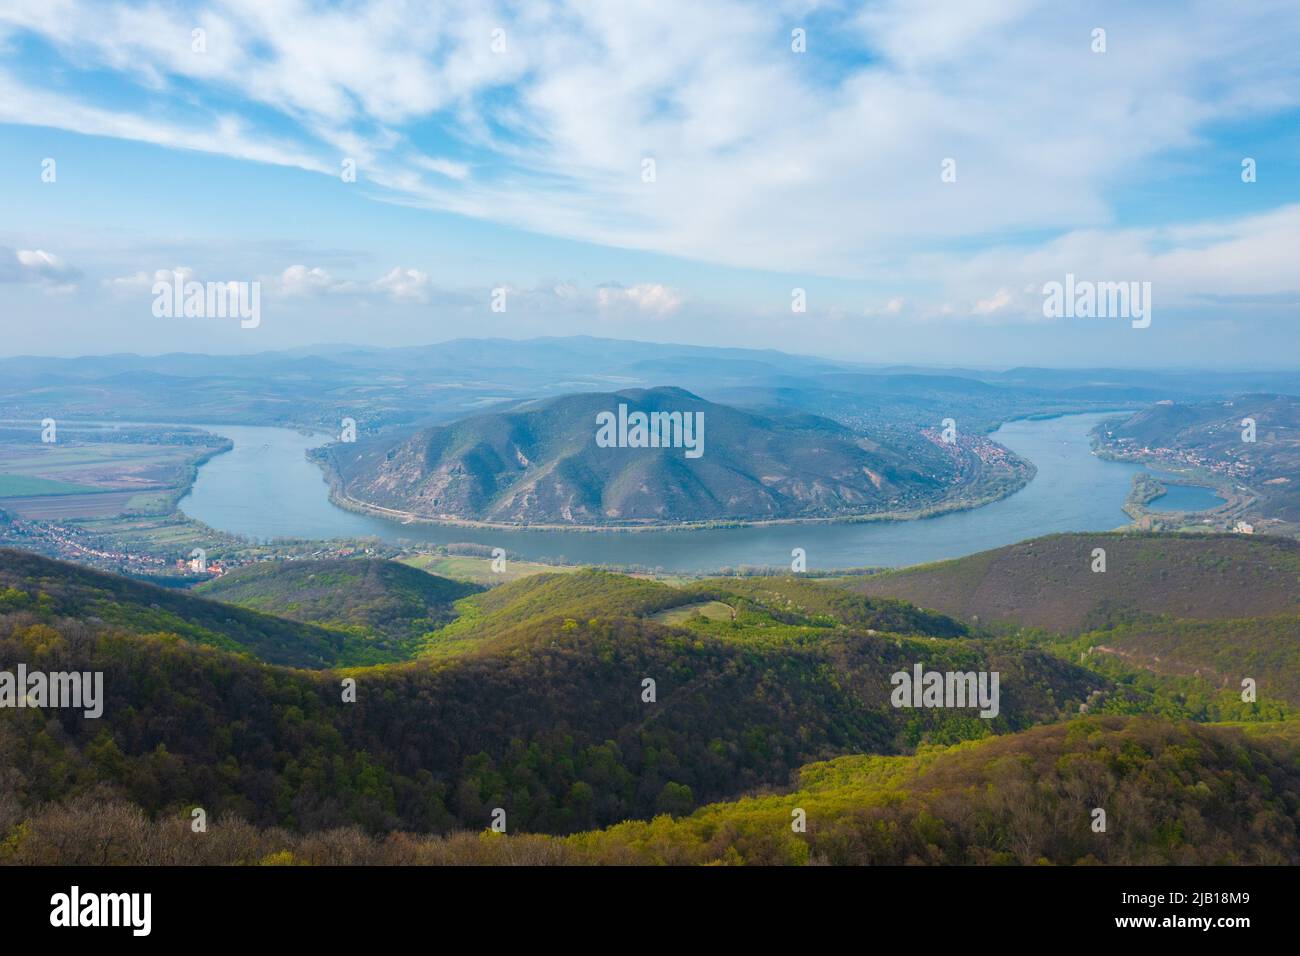 Spectacular view of danube bend from Prédikálószék lookout point. This region of Hungary is touristically very significant. Stock Photo